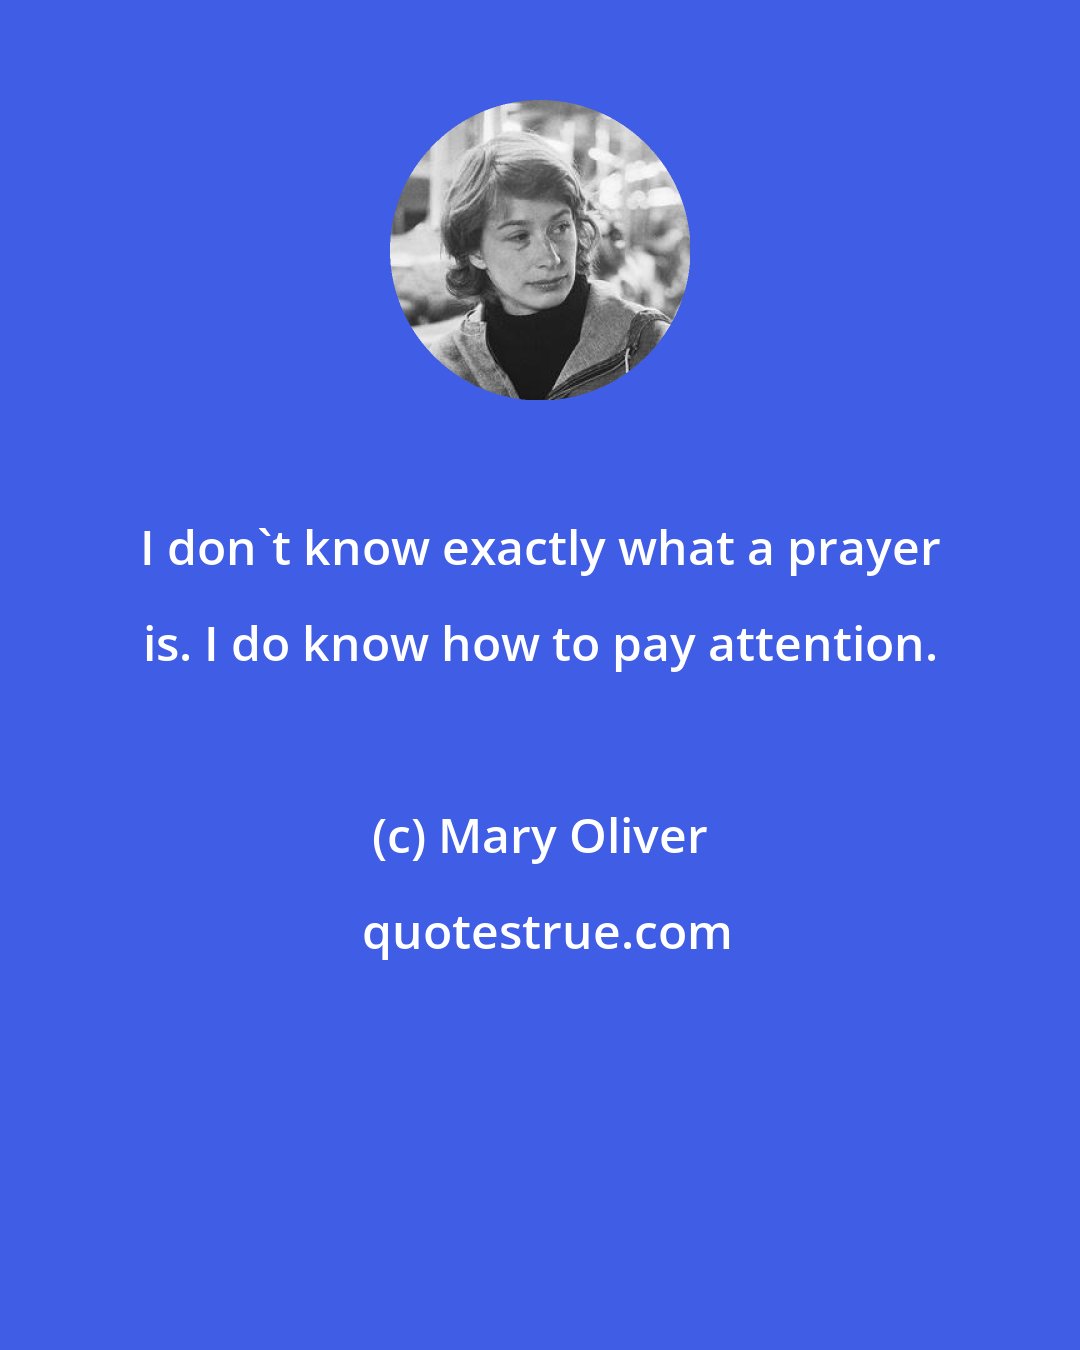 Mary Oliver: I don't know exactly what a prayer is. I do know how to pay attention.